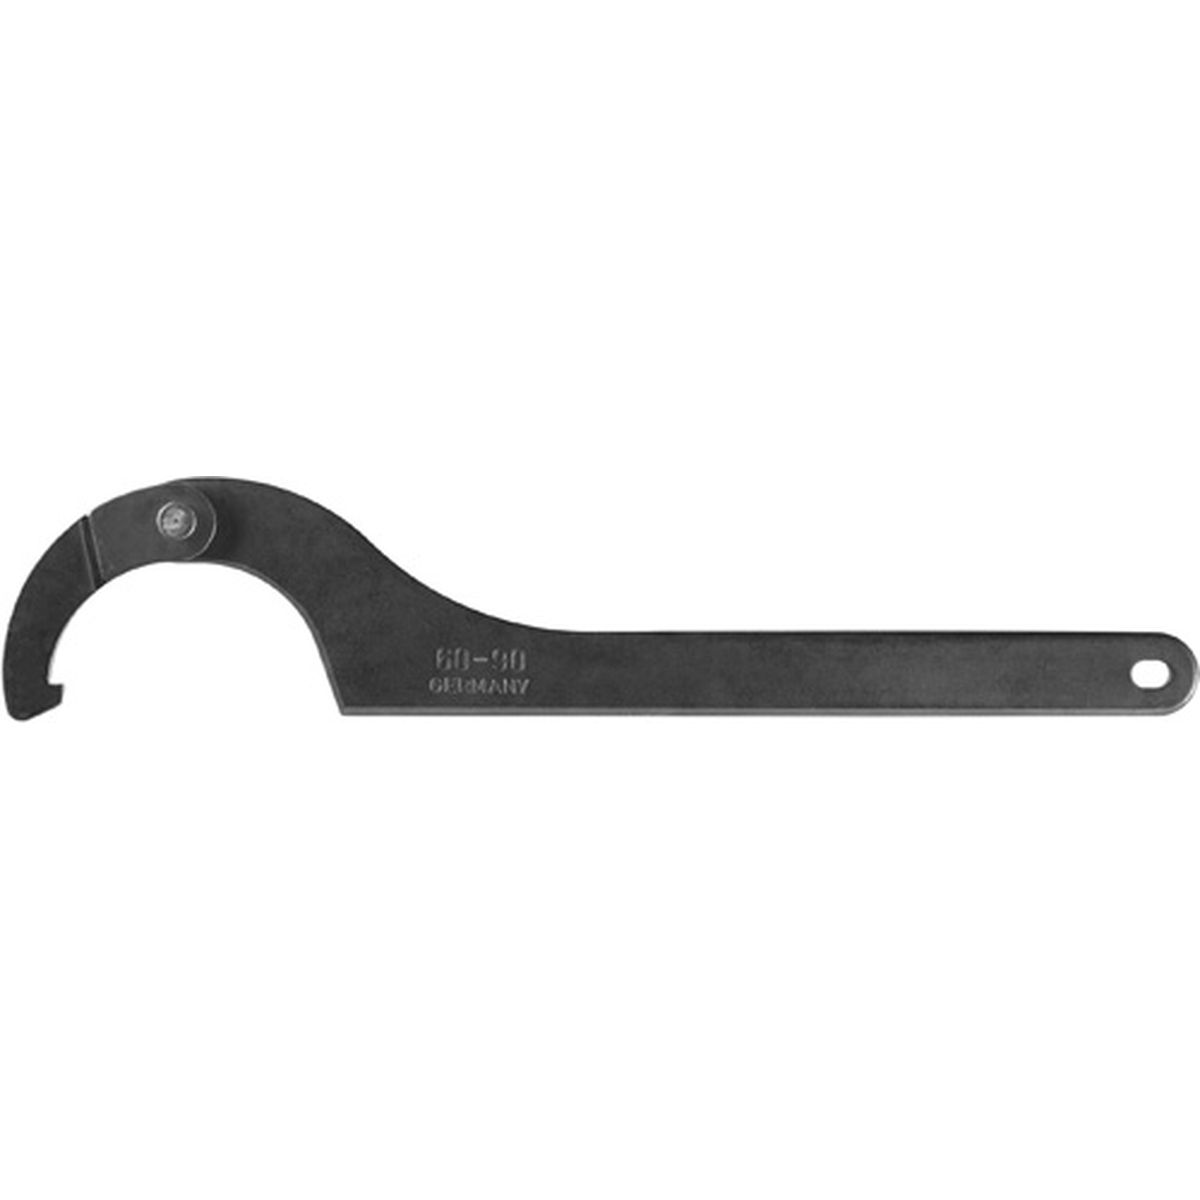 775C 60- 90 Hinged hook wrench with nose AMF